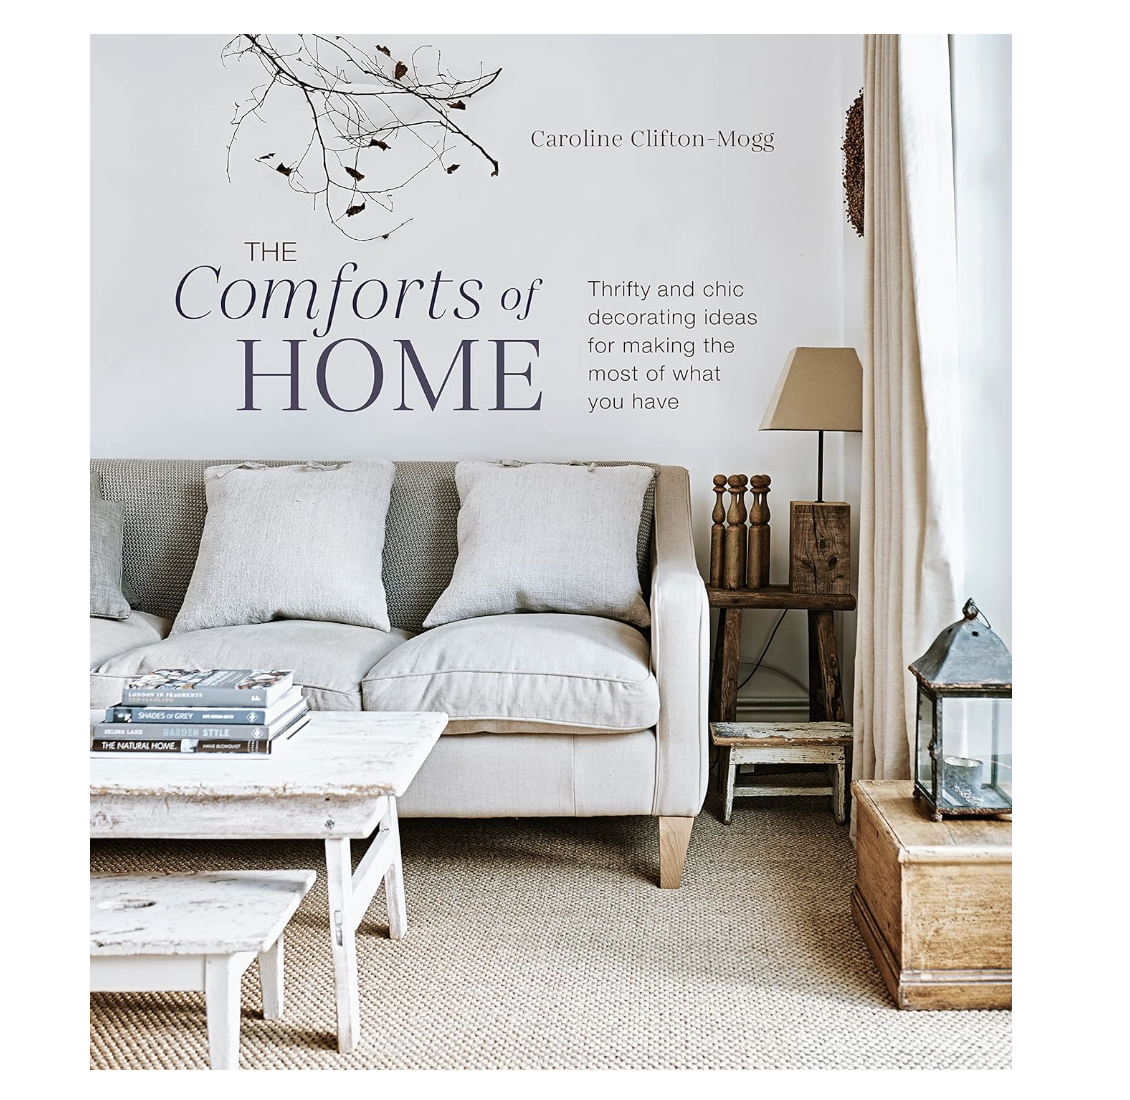 The Comforts of Home: Thrifty and chic decorating ideas